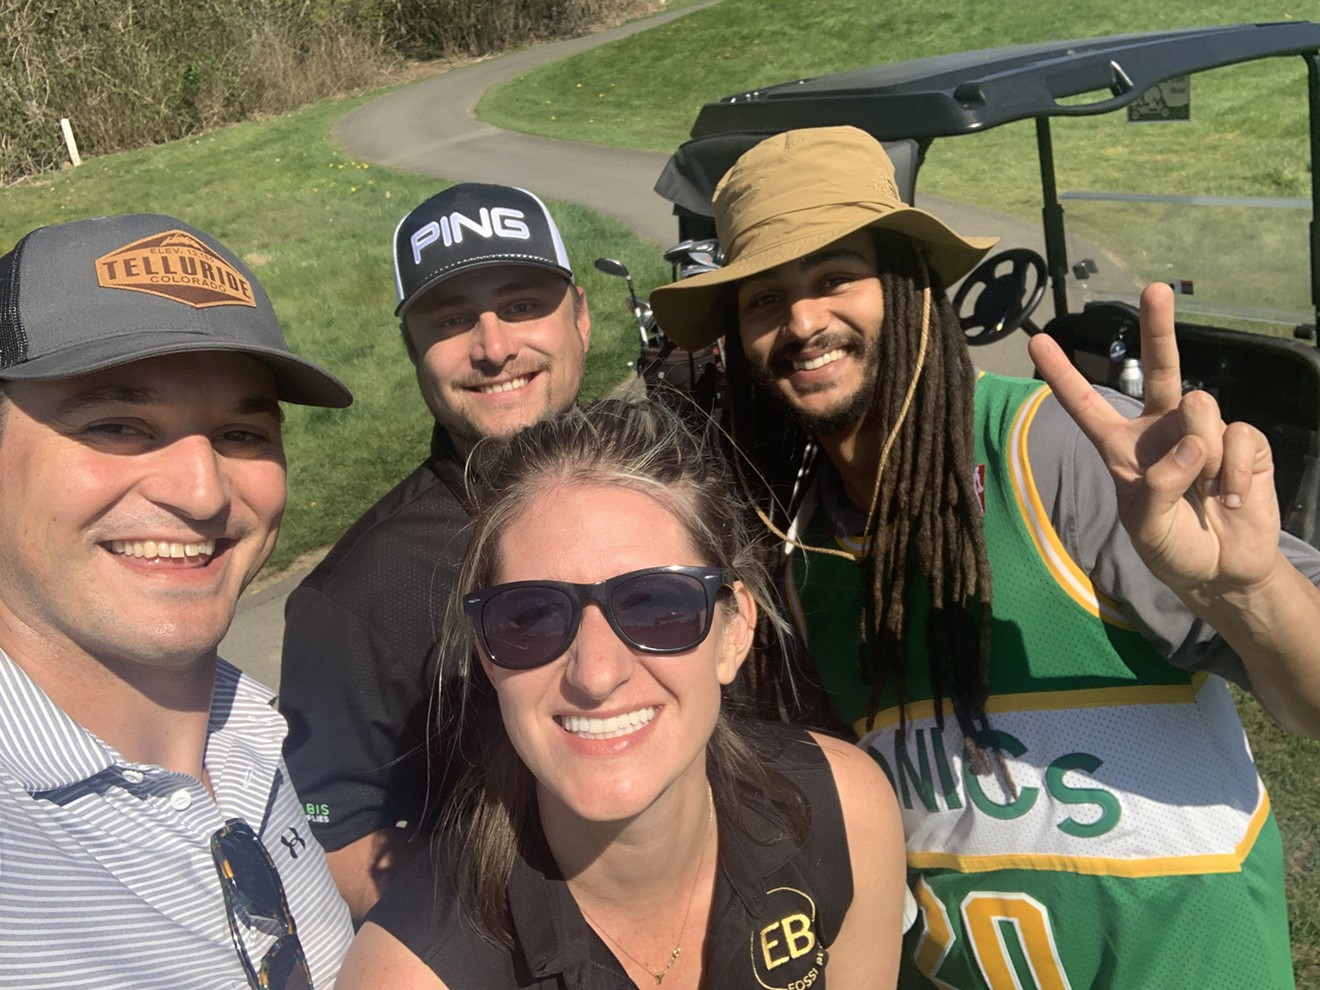 Cannabis Golf League directors Shannon Kaygi and Evan Patterson (middle top and bottom) believe that cannabis and golf benefit each other.